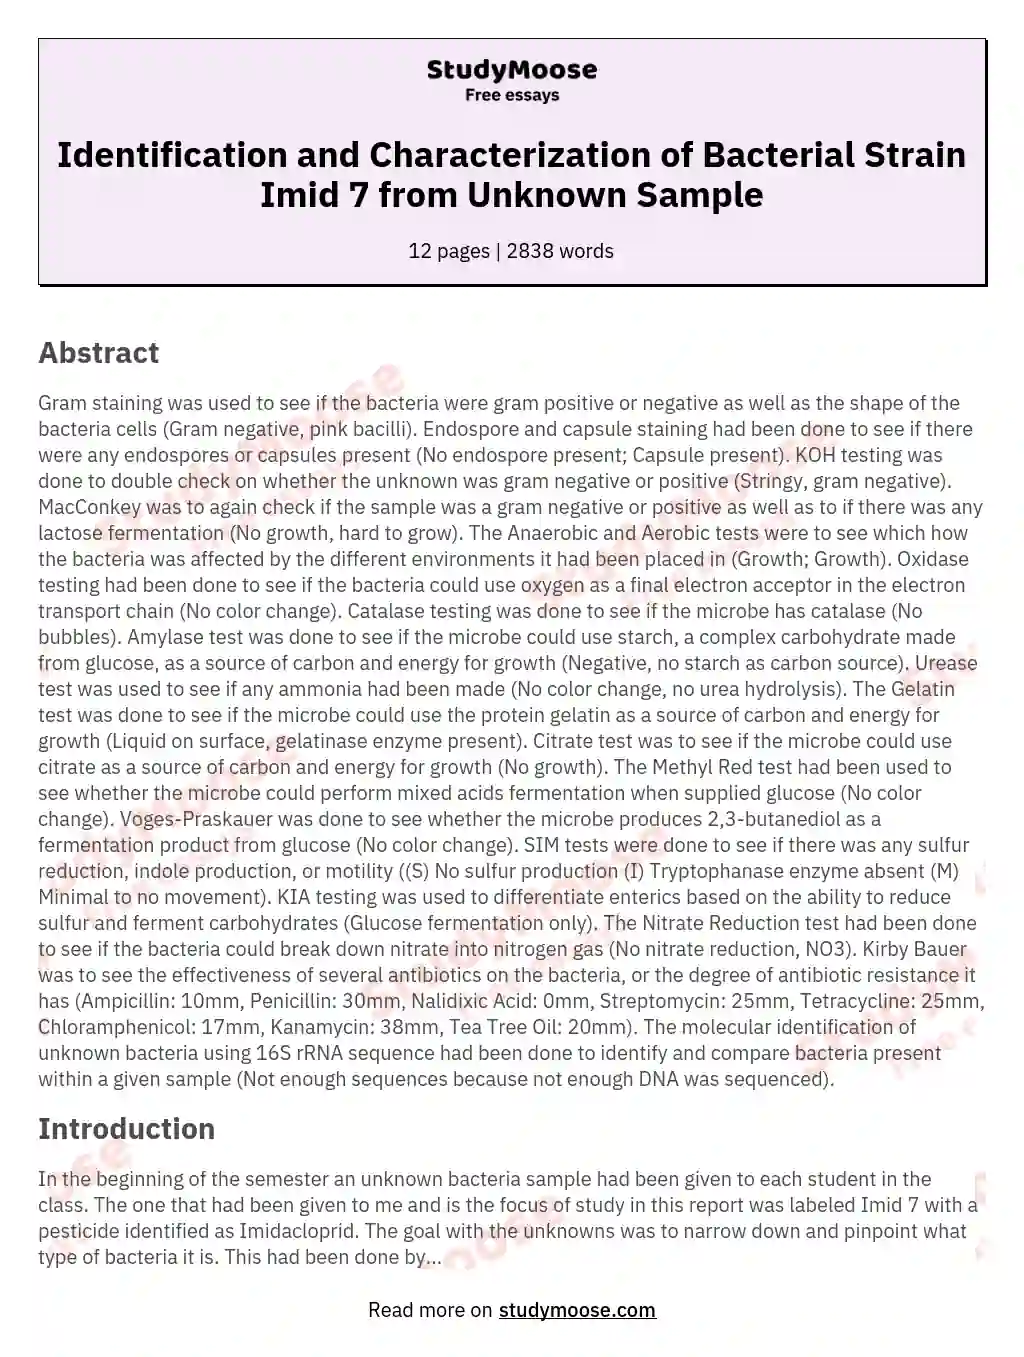 Identification and Characterization of Bacterial Strain Imid 7 from Unknown Sample essay